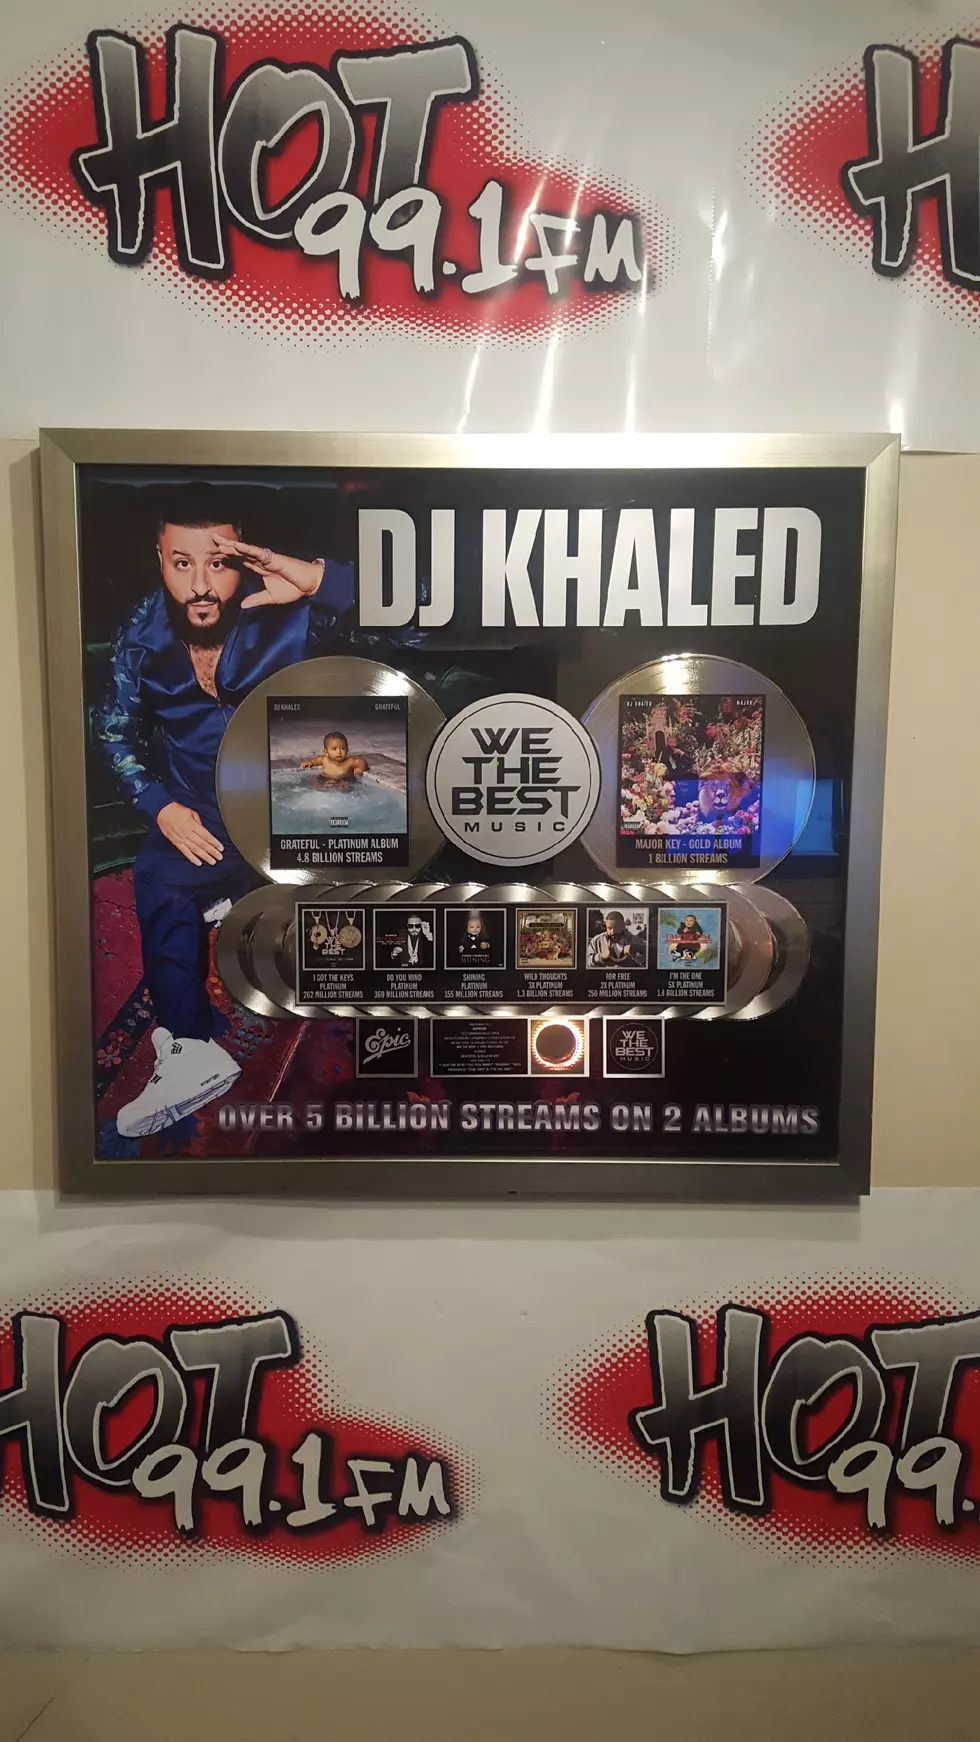 Do we miss the BIG decor or are we feeling the new Khaled decor?